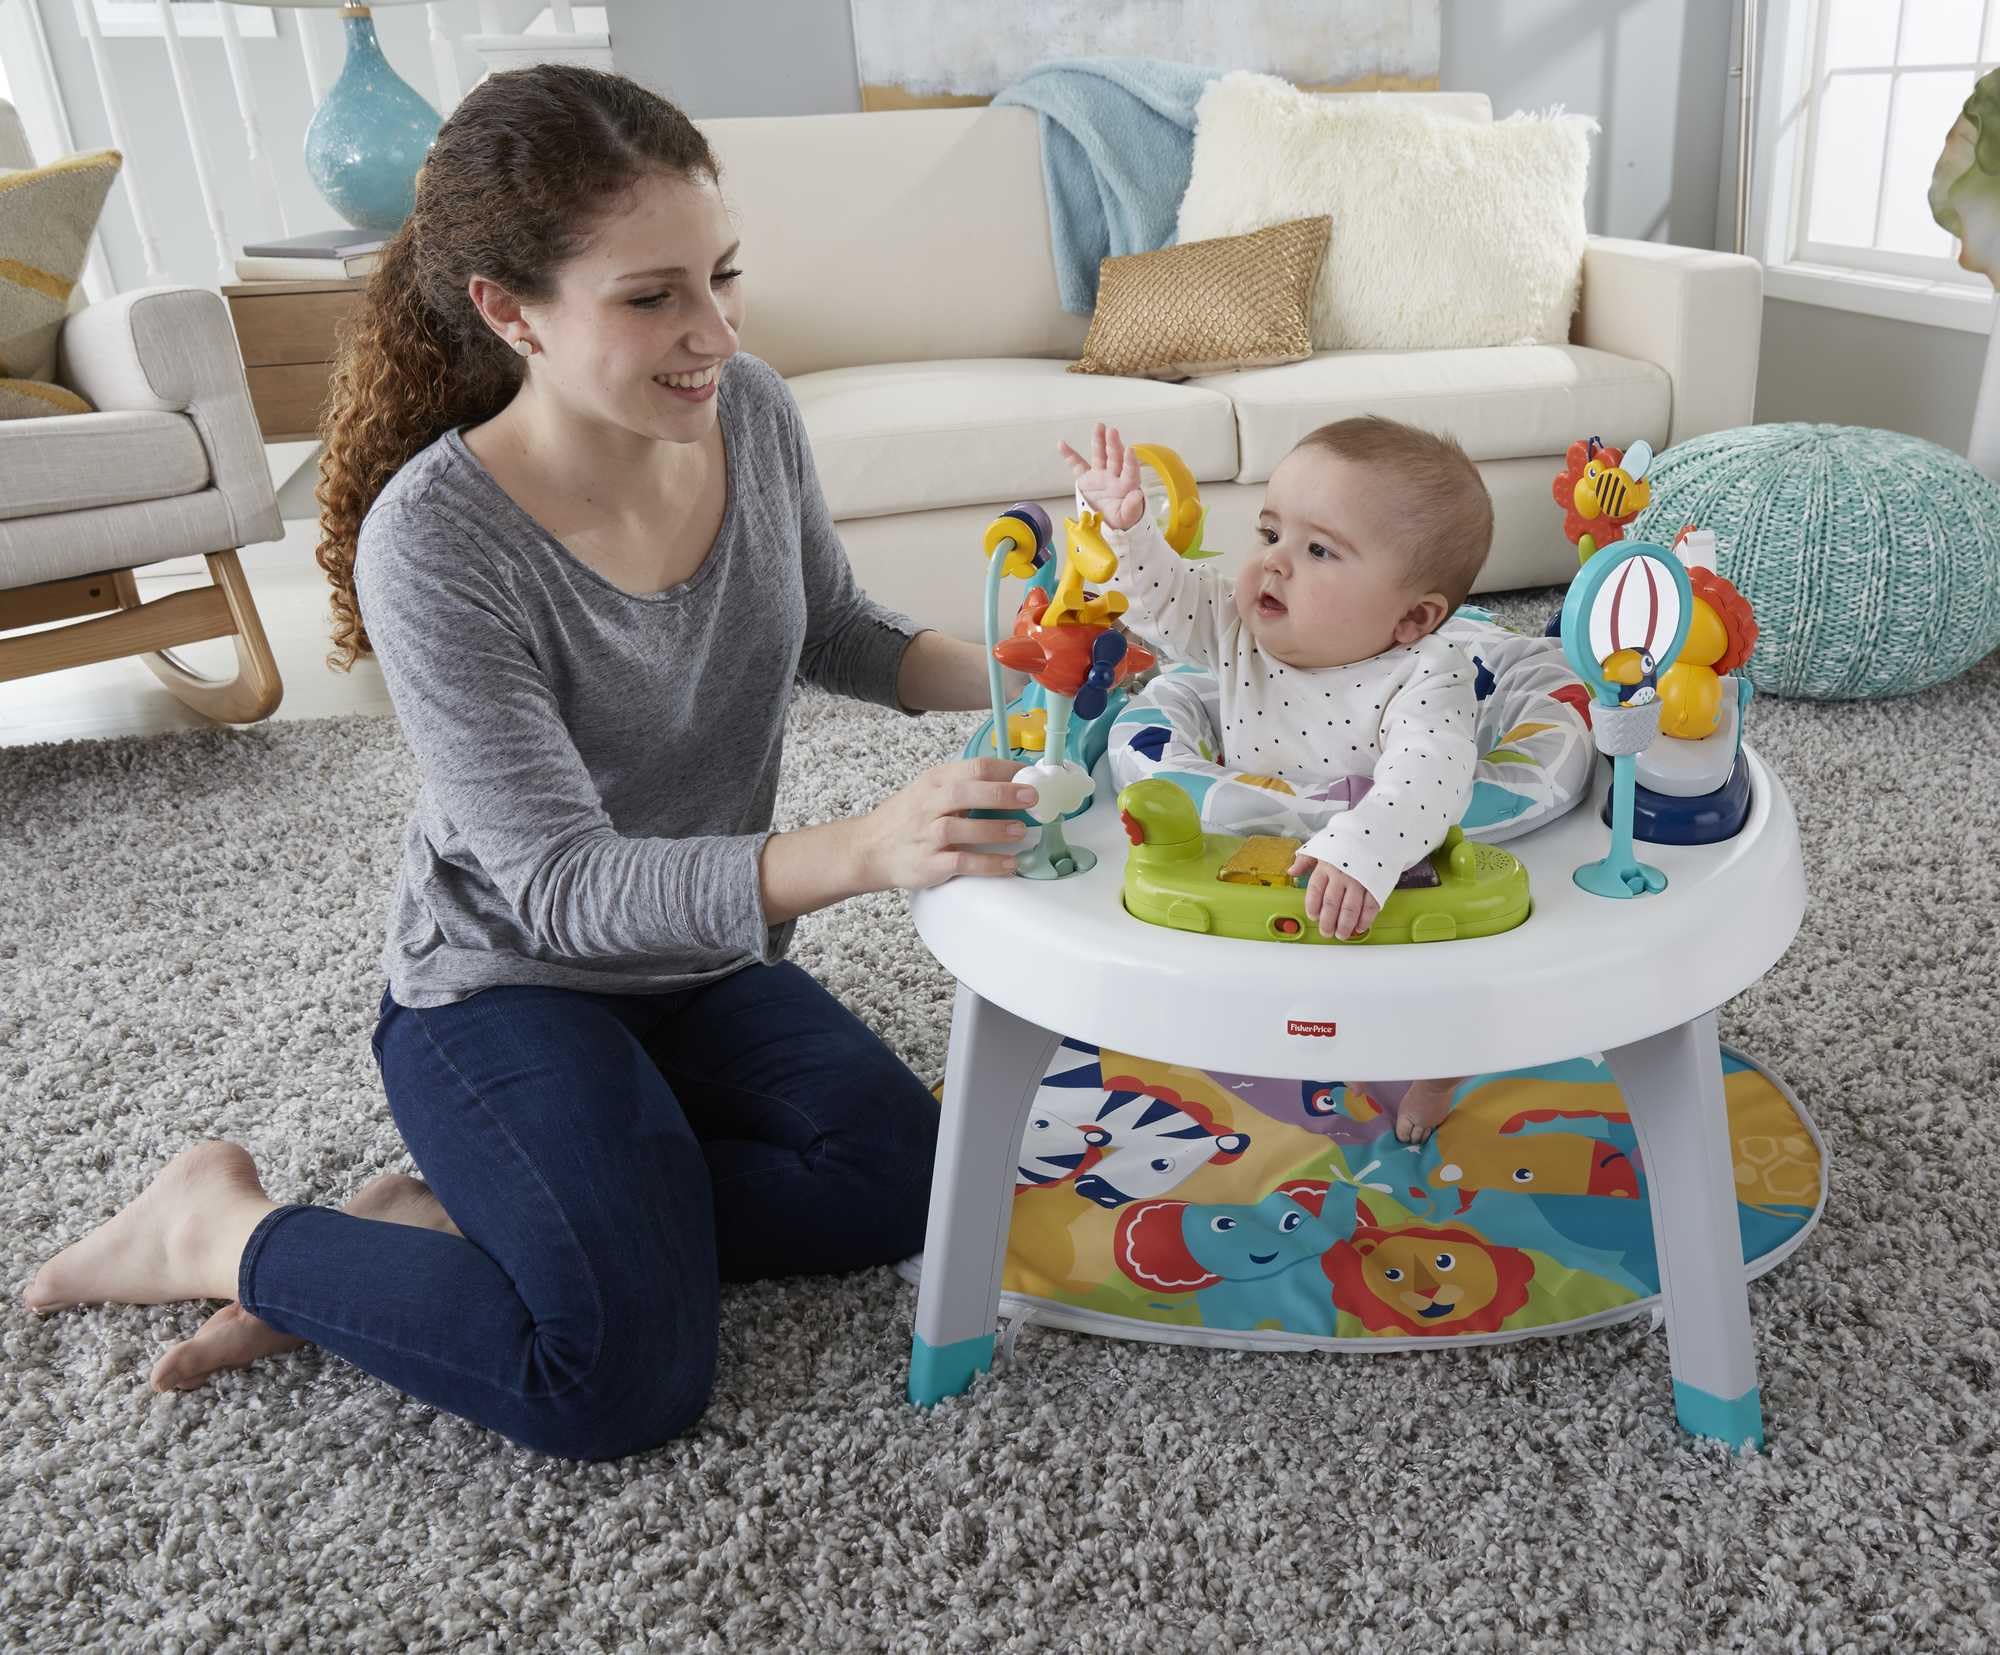 Fisher-Price Baby To Toddler -Toy 3-In-1 Sit-To-Stand Activity Center With Playmat Plus Music Lights And Spiral Ramp